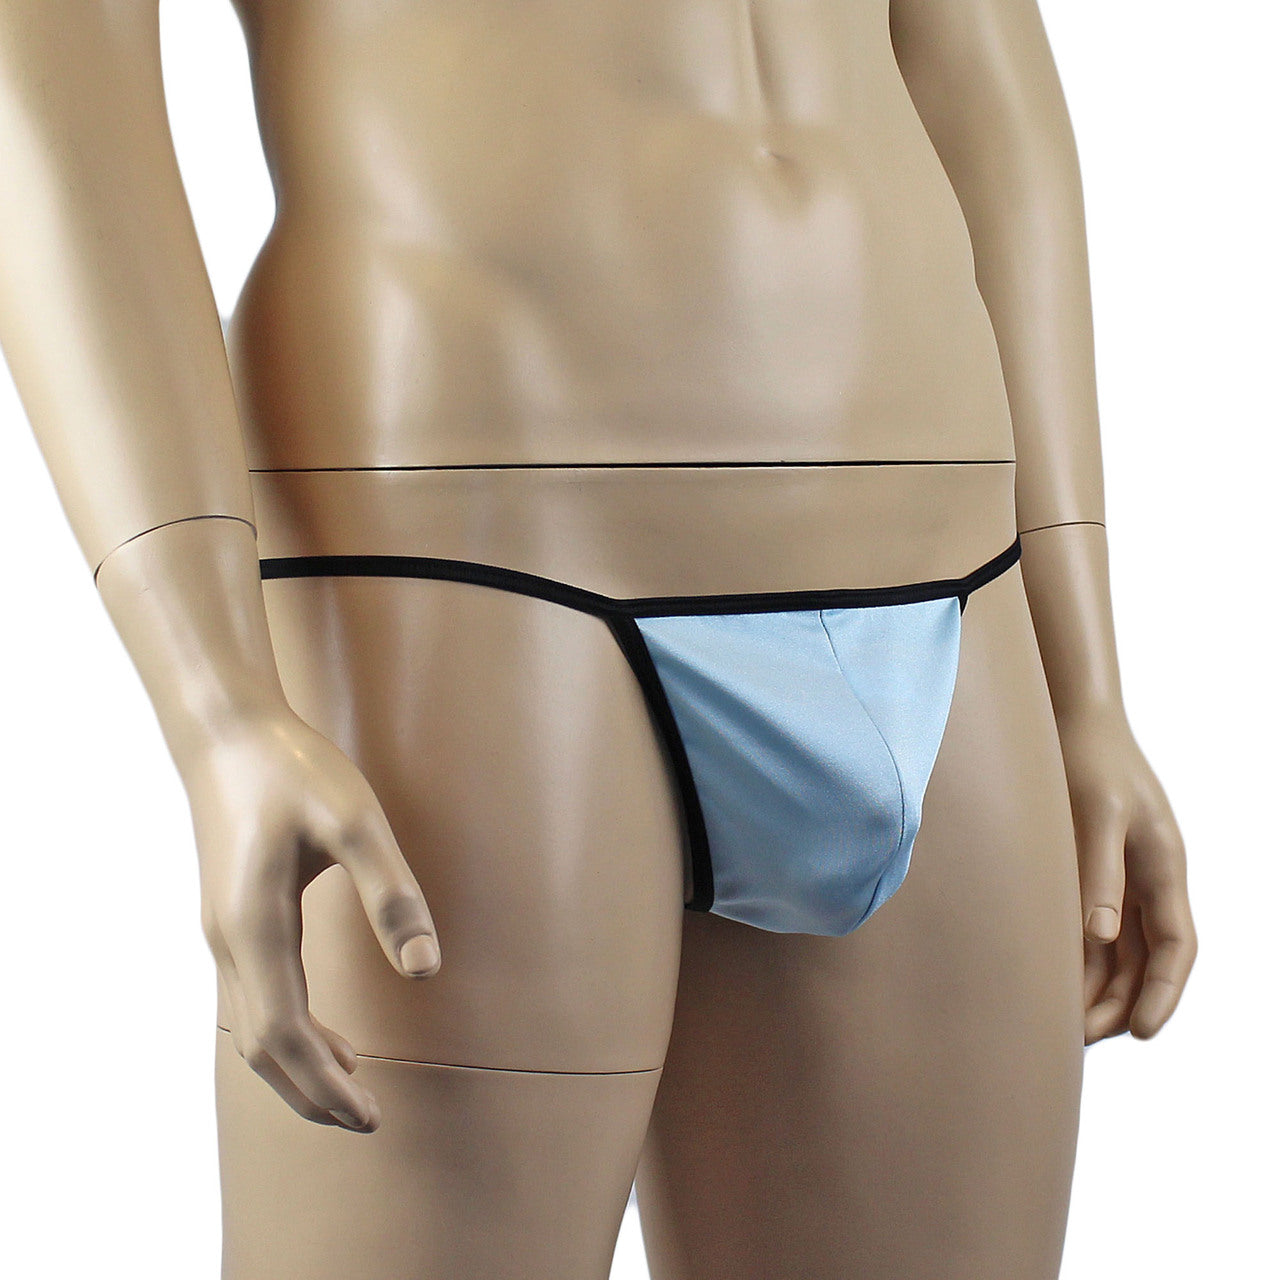 Mens Twinkle Lingerie Pouch G string with Triangle Back & Bow (light blue plus other colours)